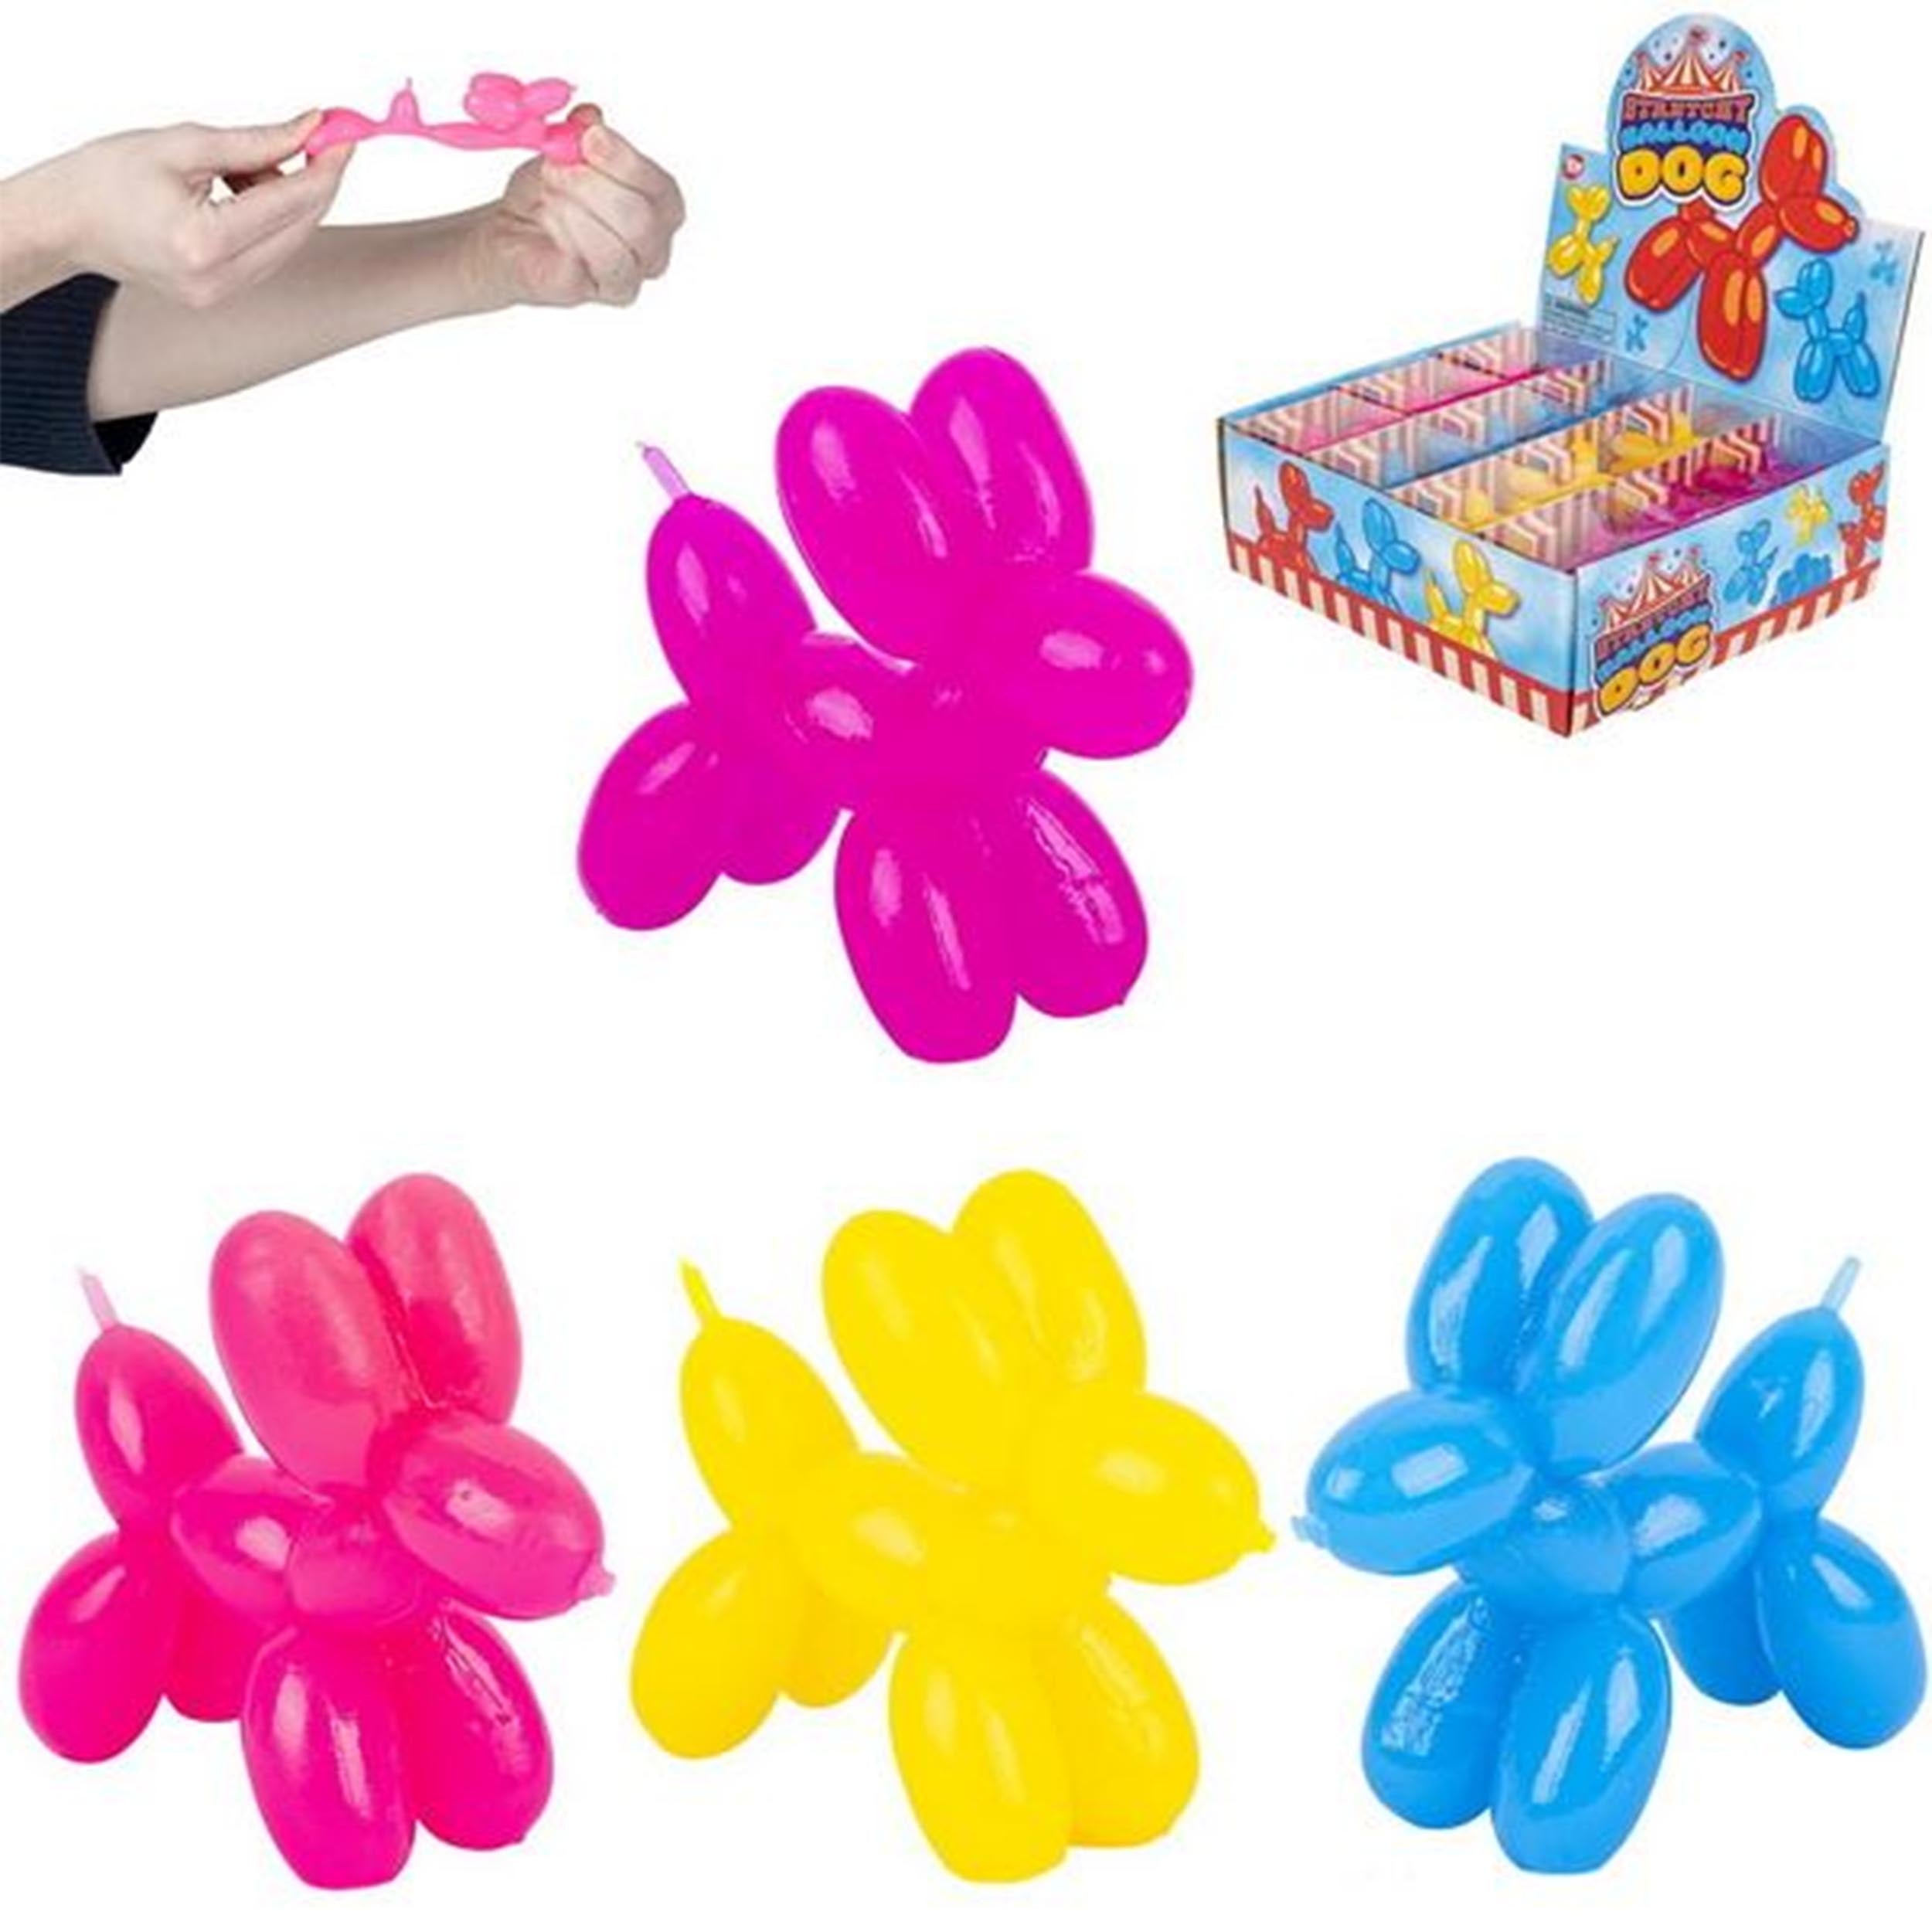 4 STRECHY BALLOON DOG - Party Favor Stretch Rubber Chid Toy - Assorted  Colors!